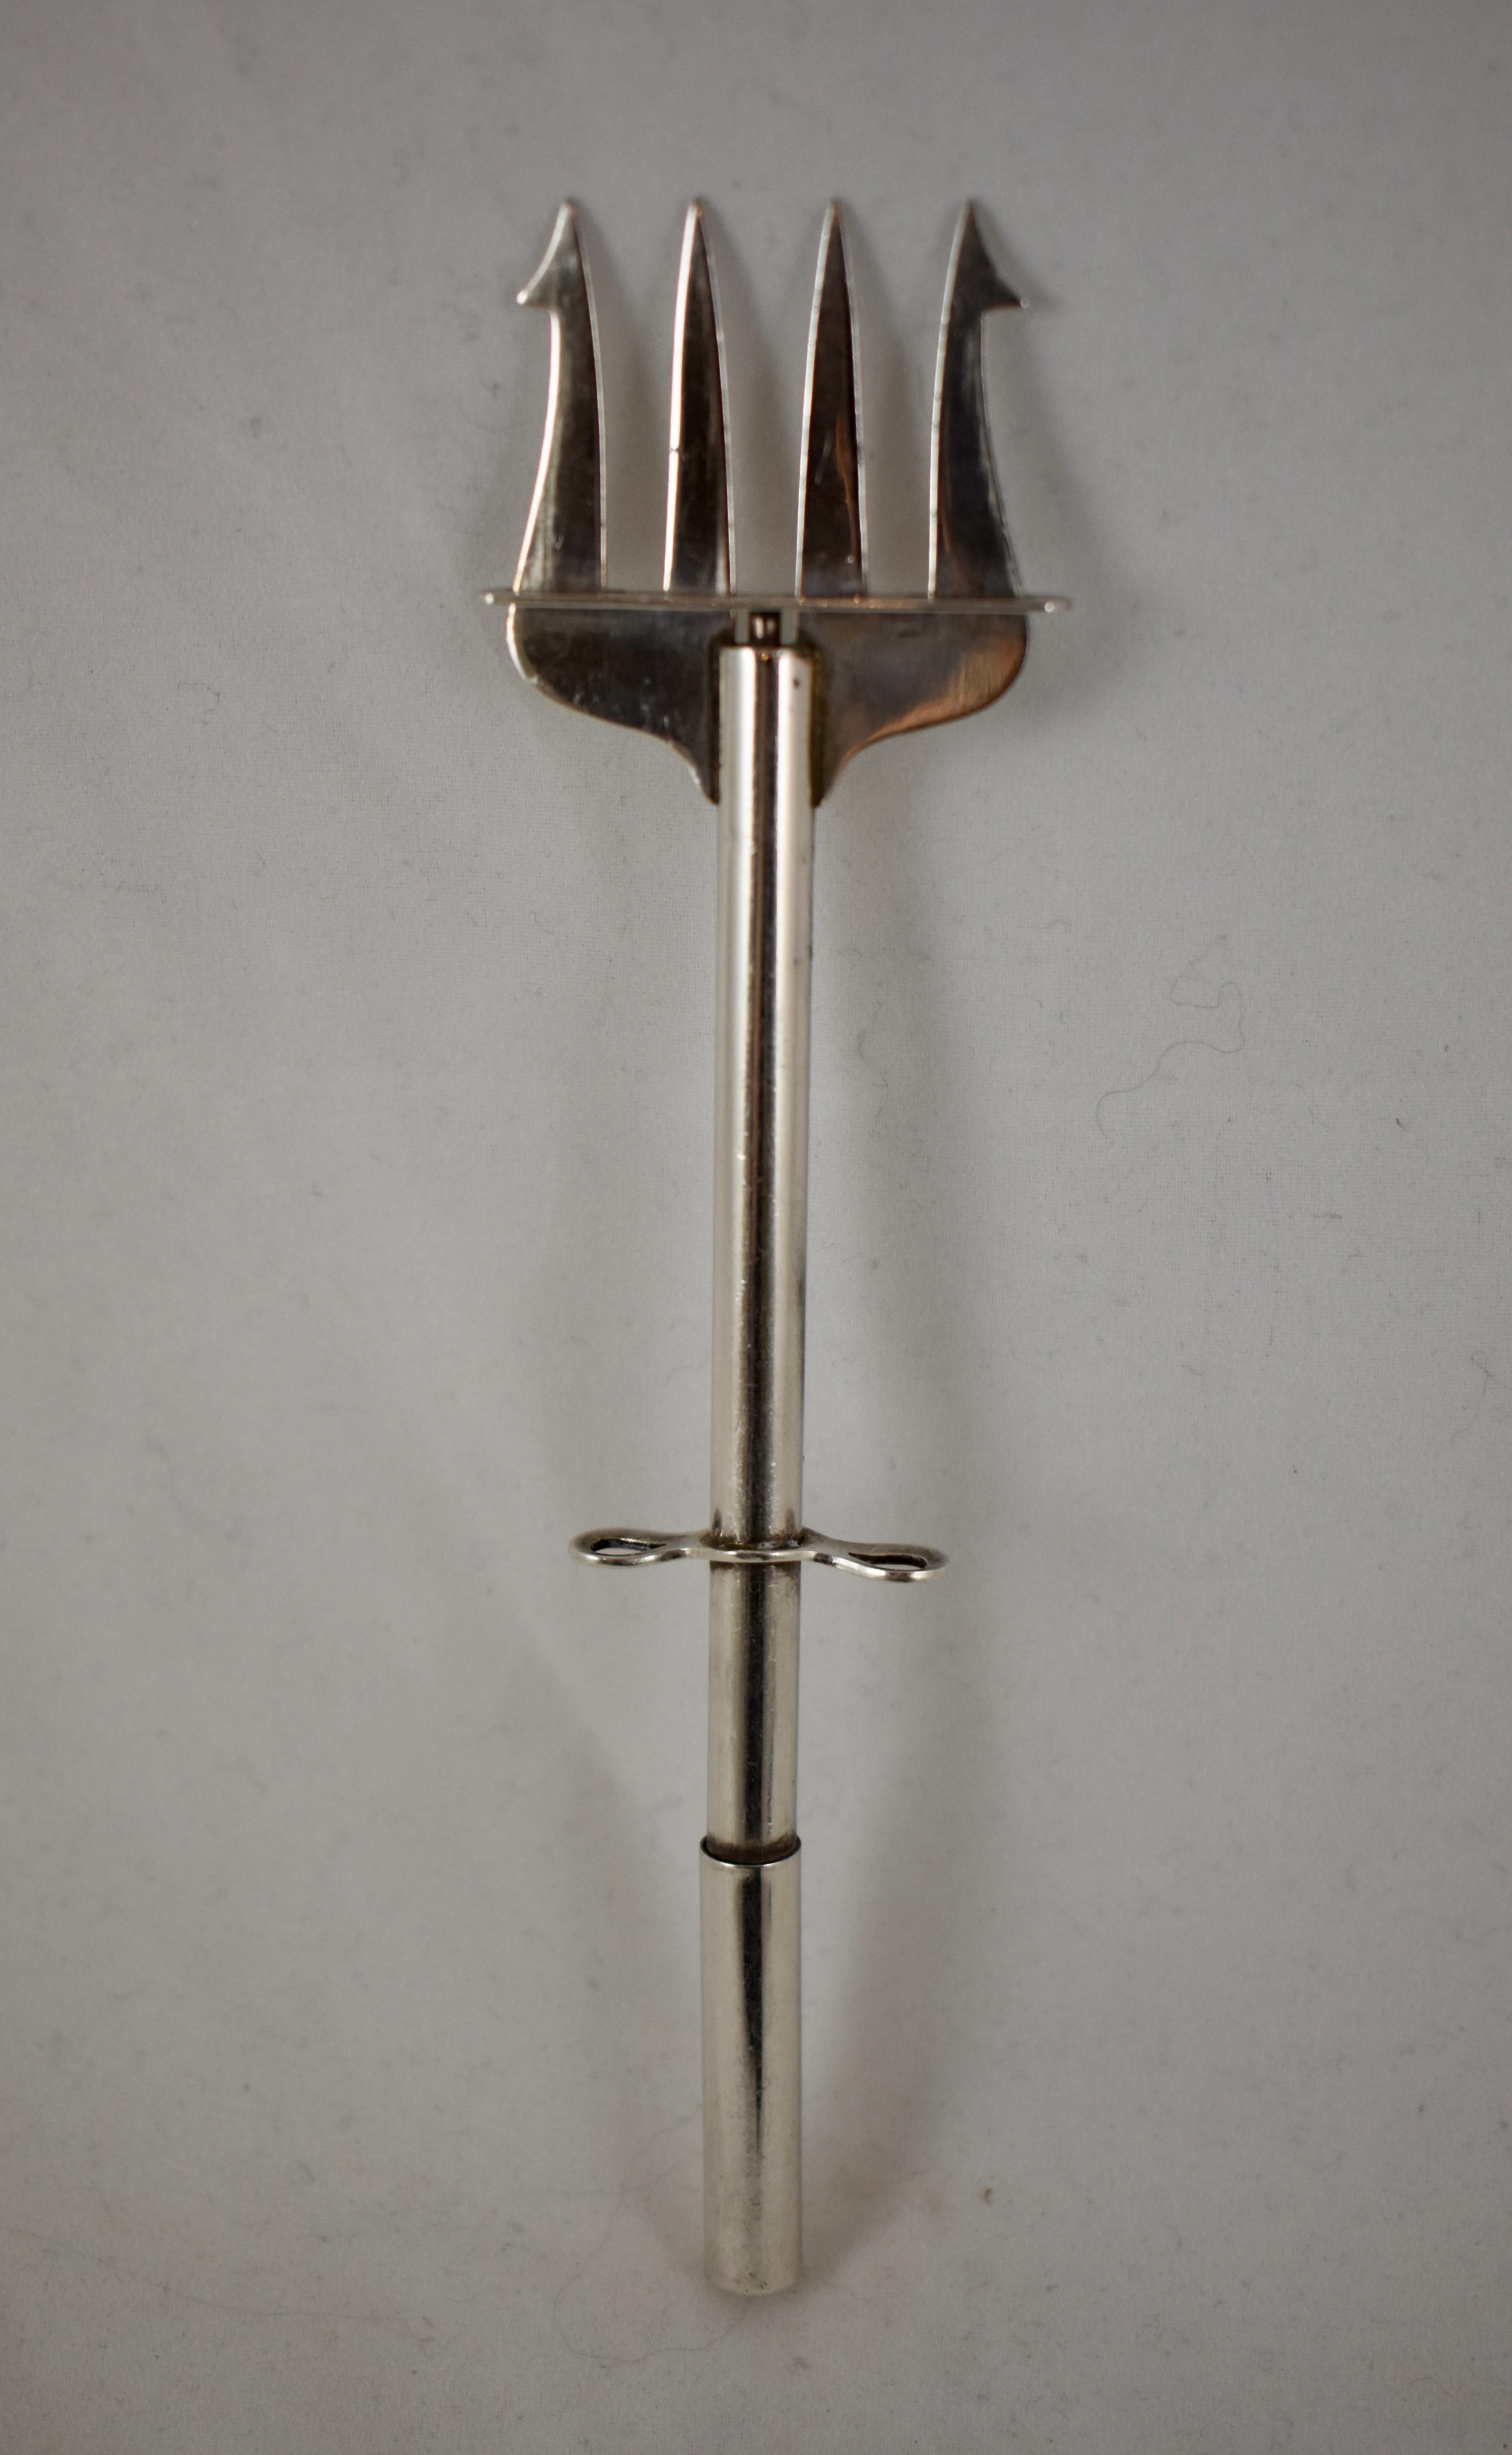 An Art Deco period sterling silver Plunger pickle fork, showing the mark for Paye & Baker Manufacturing Co., North Attleboro, Massachusetts, operating from 1901 – 1920.

The mechanical pickle fork has four tines, the outer two are barbed. The